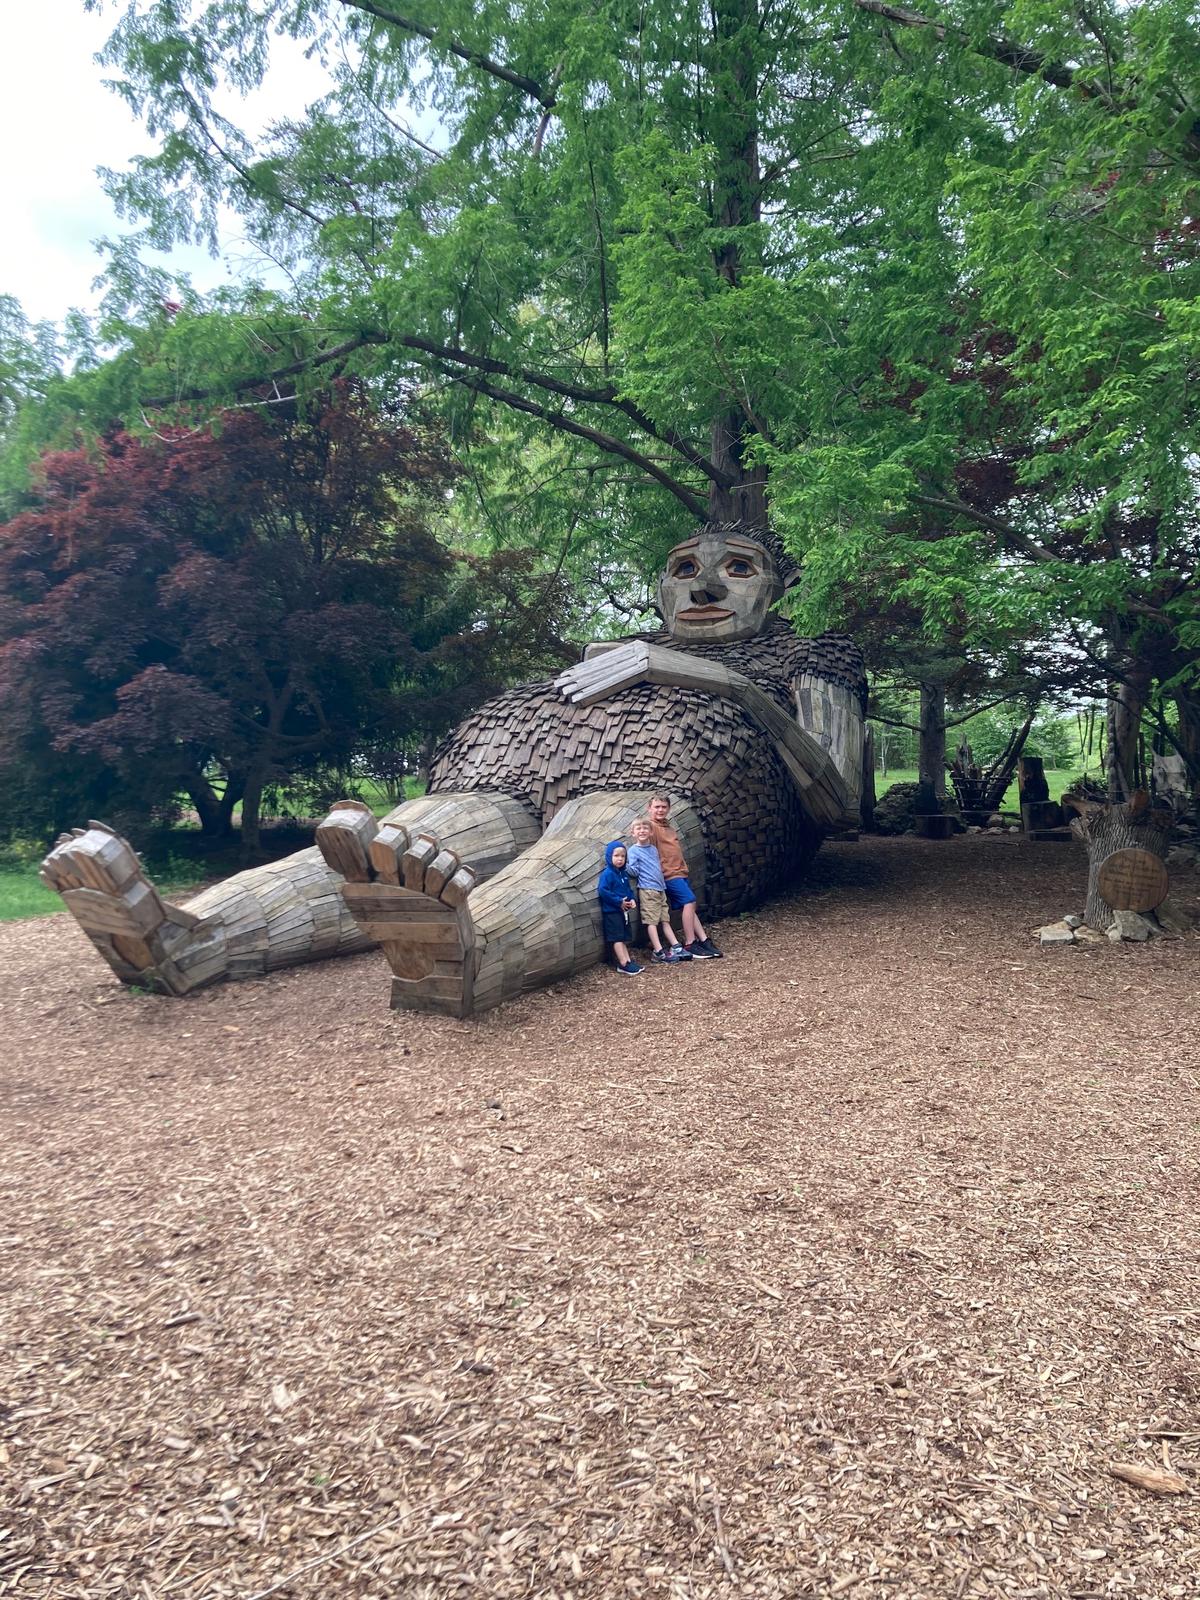 The family visits the "Forest Giants in a Giant Forest" sculptures at the Bernheim Arboretum and Research Forest in Clermont, Kentucky. (Colleen Carswell)